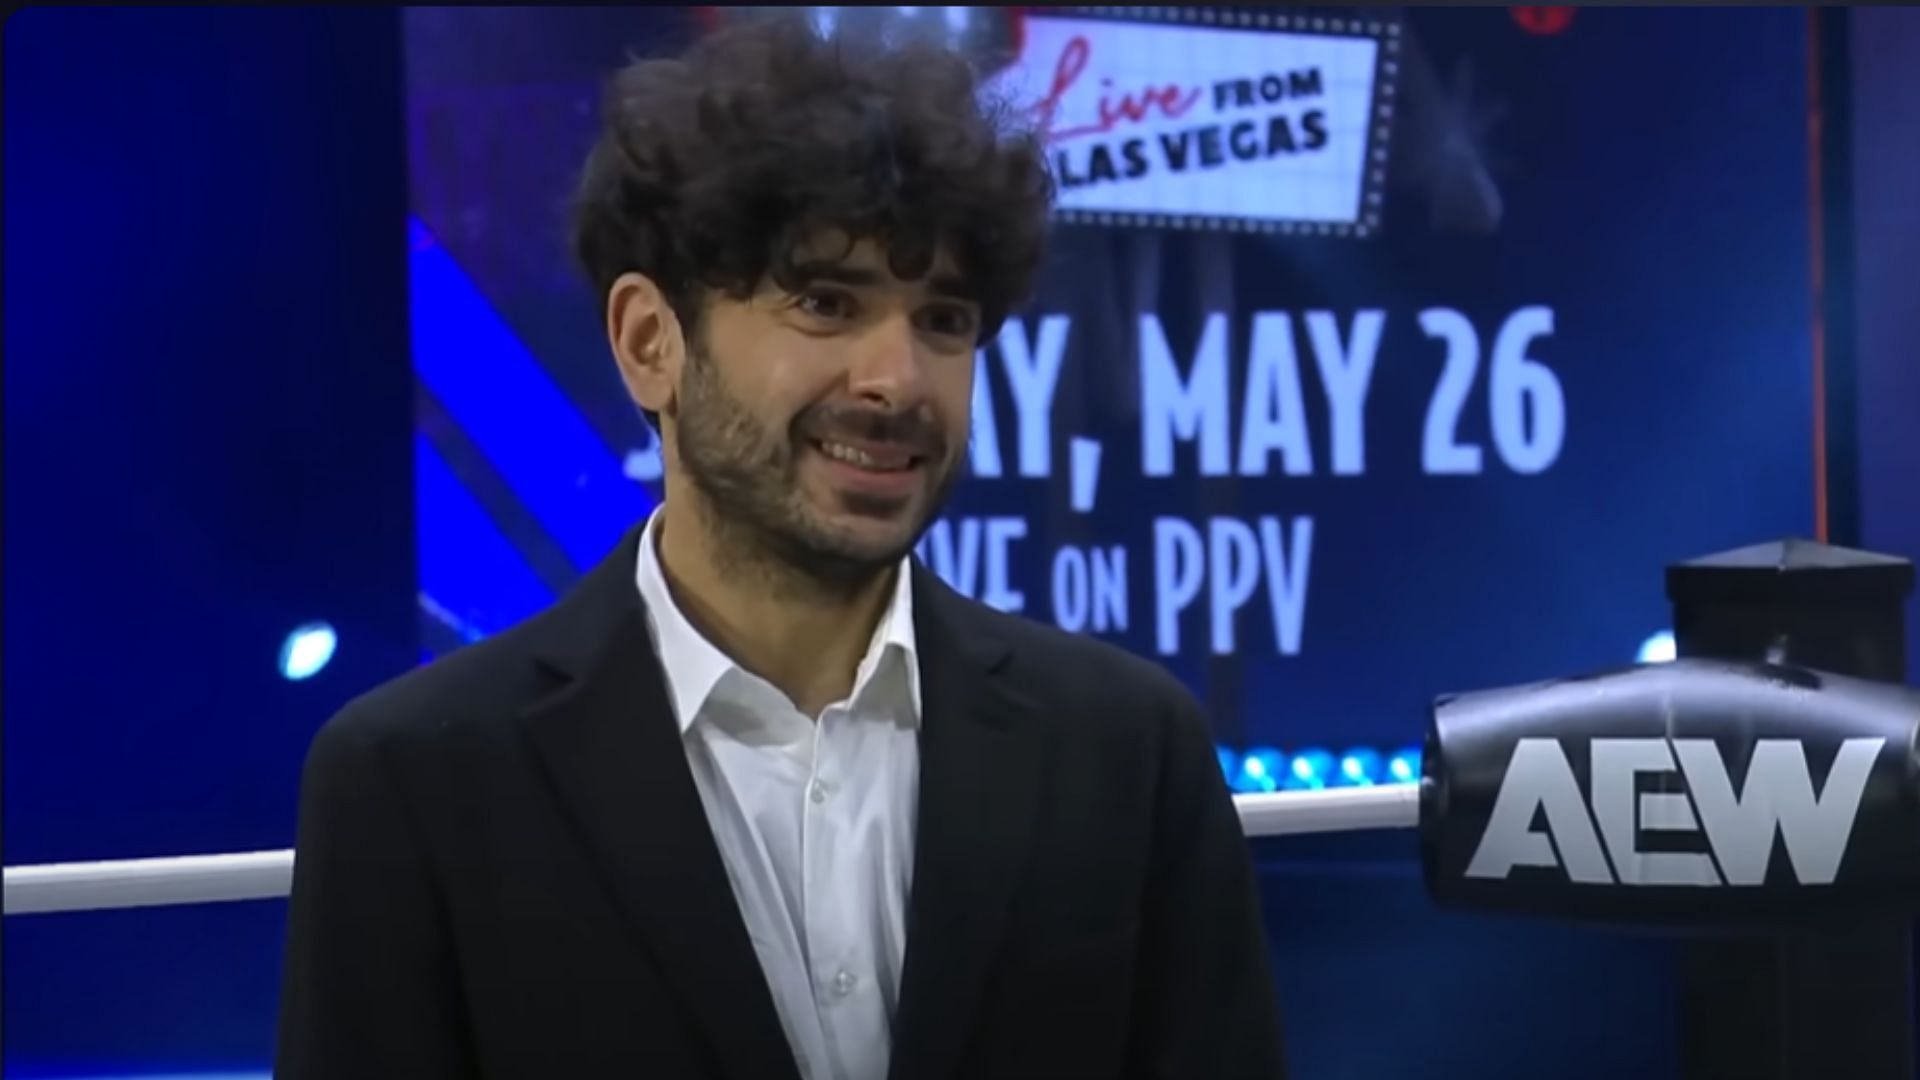 Tony Khan is the CEO of AEW [Image Credits: AEW